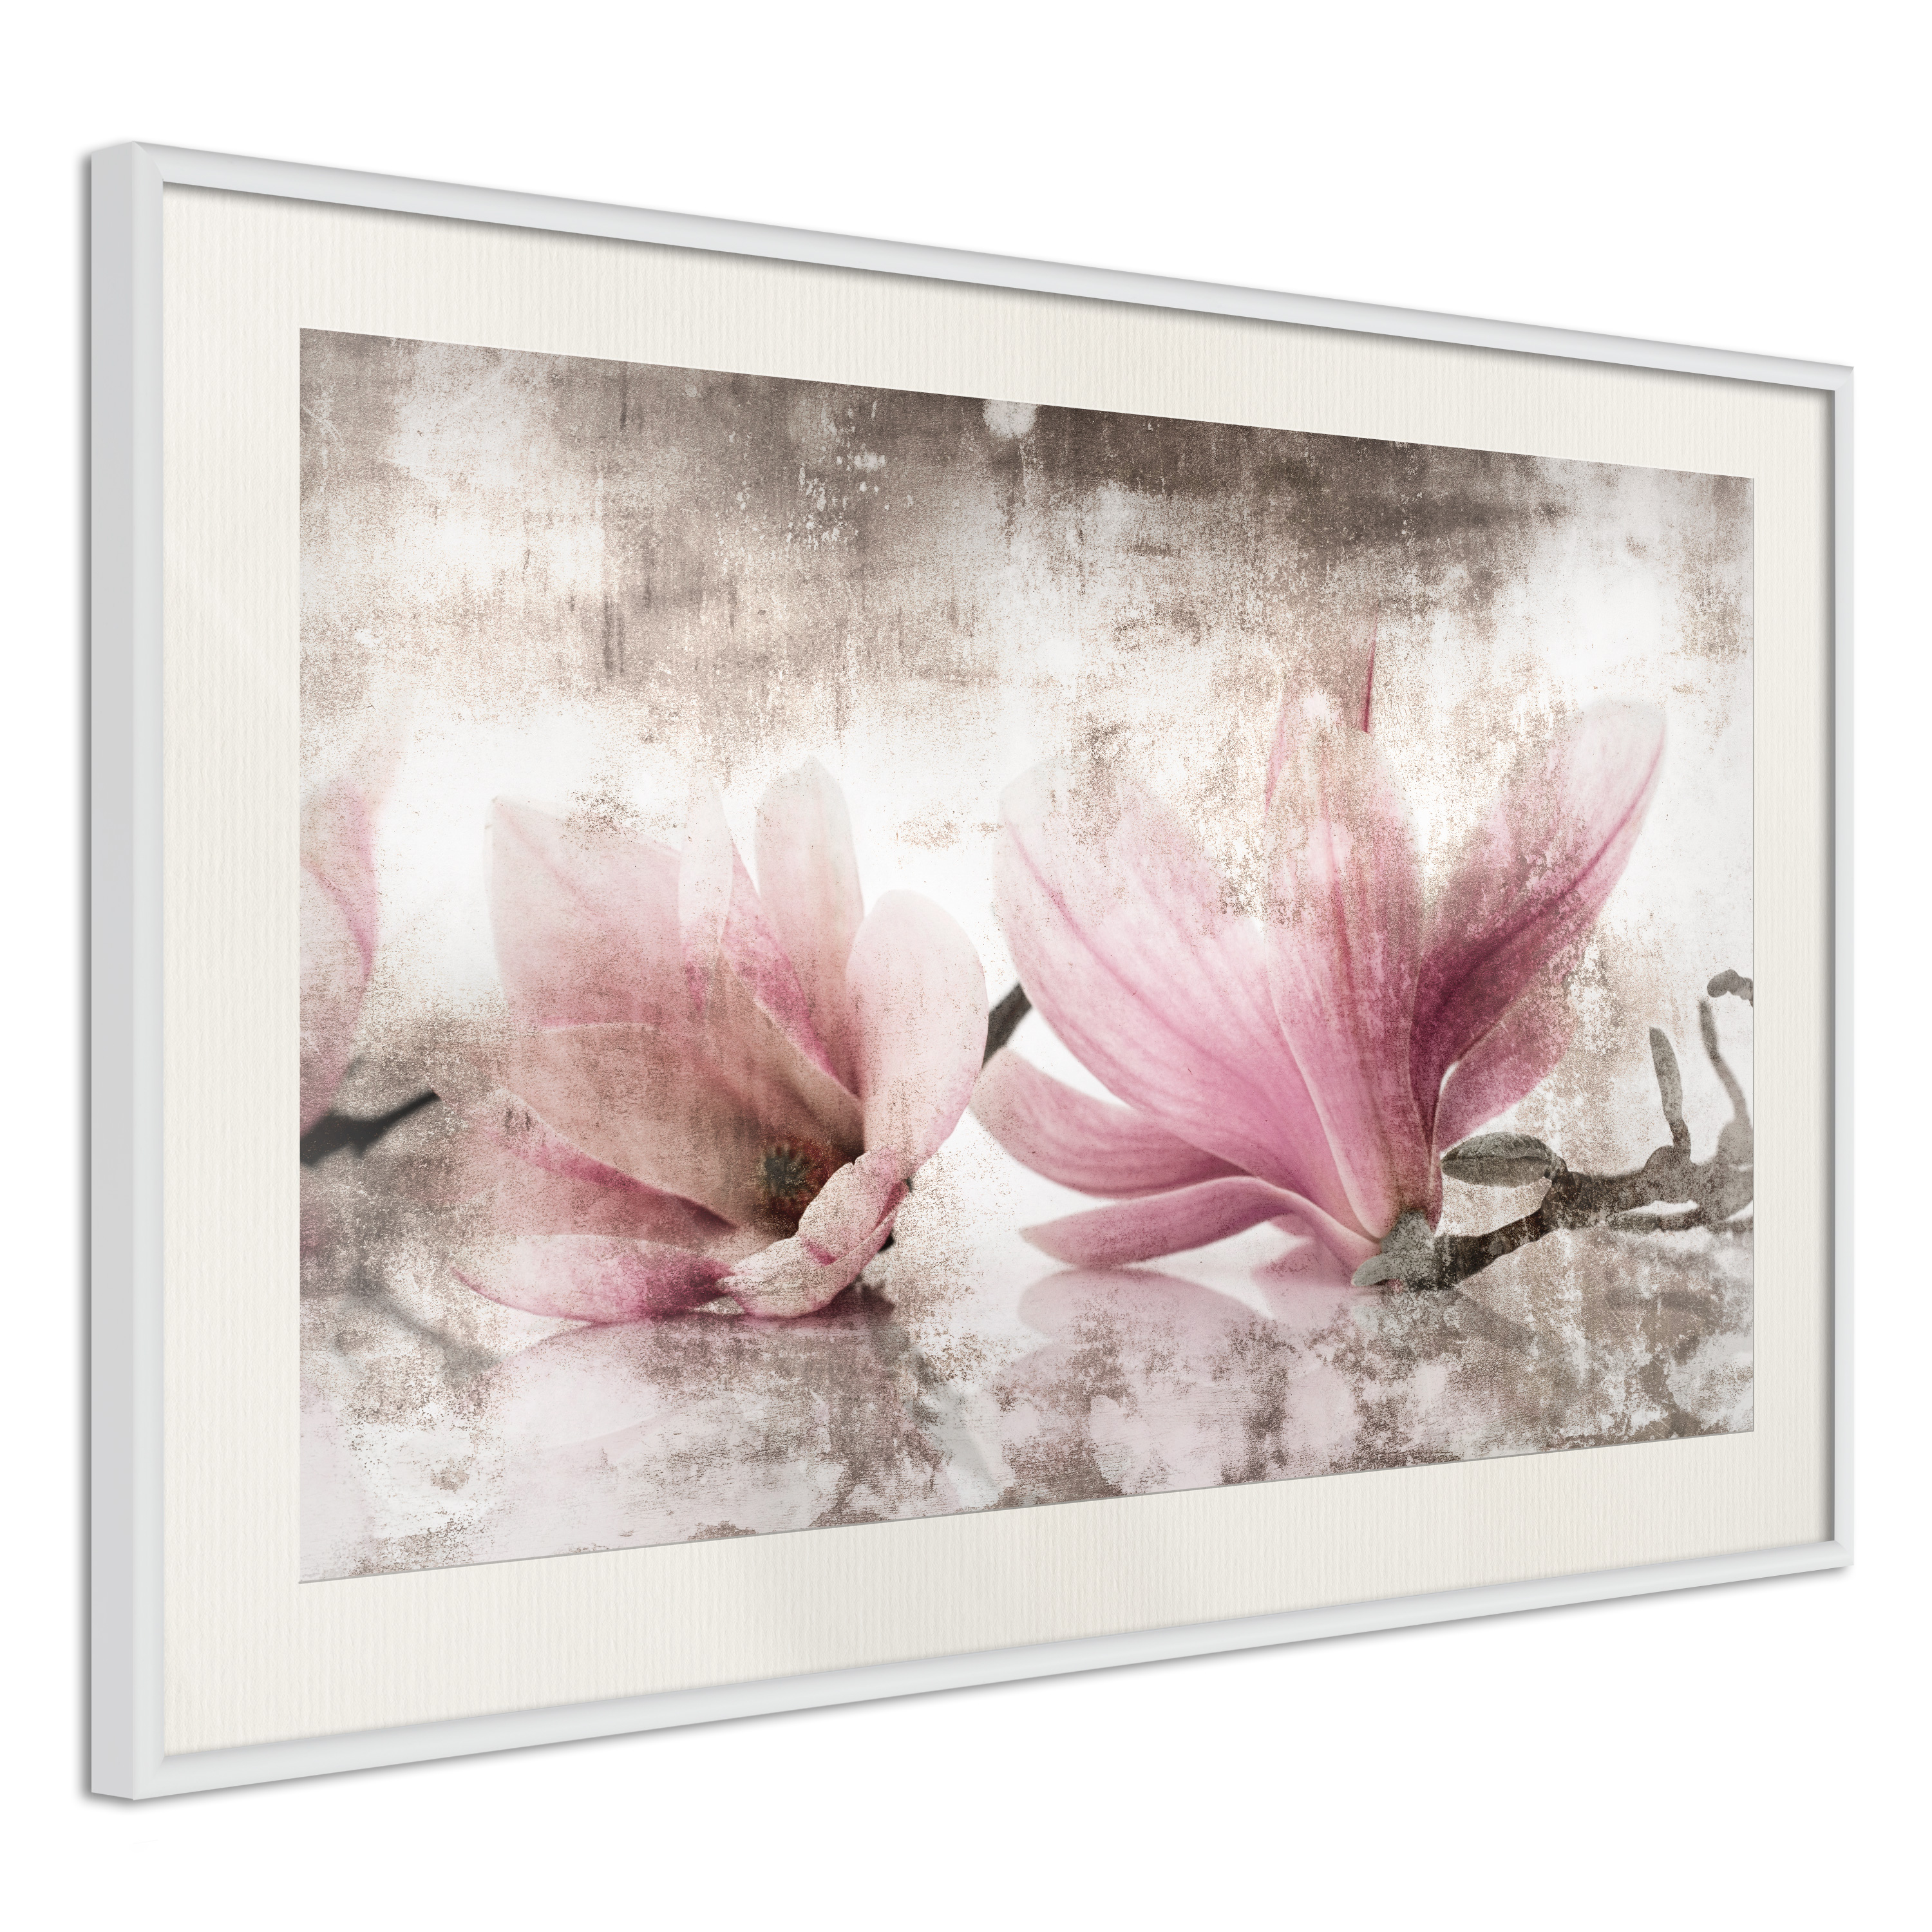 Poster - Picked Magnolias - 30x20